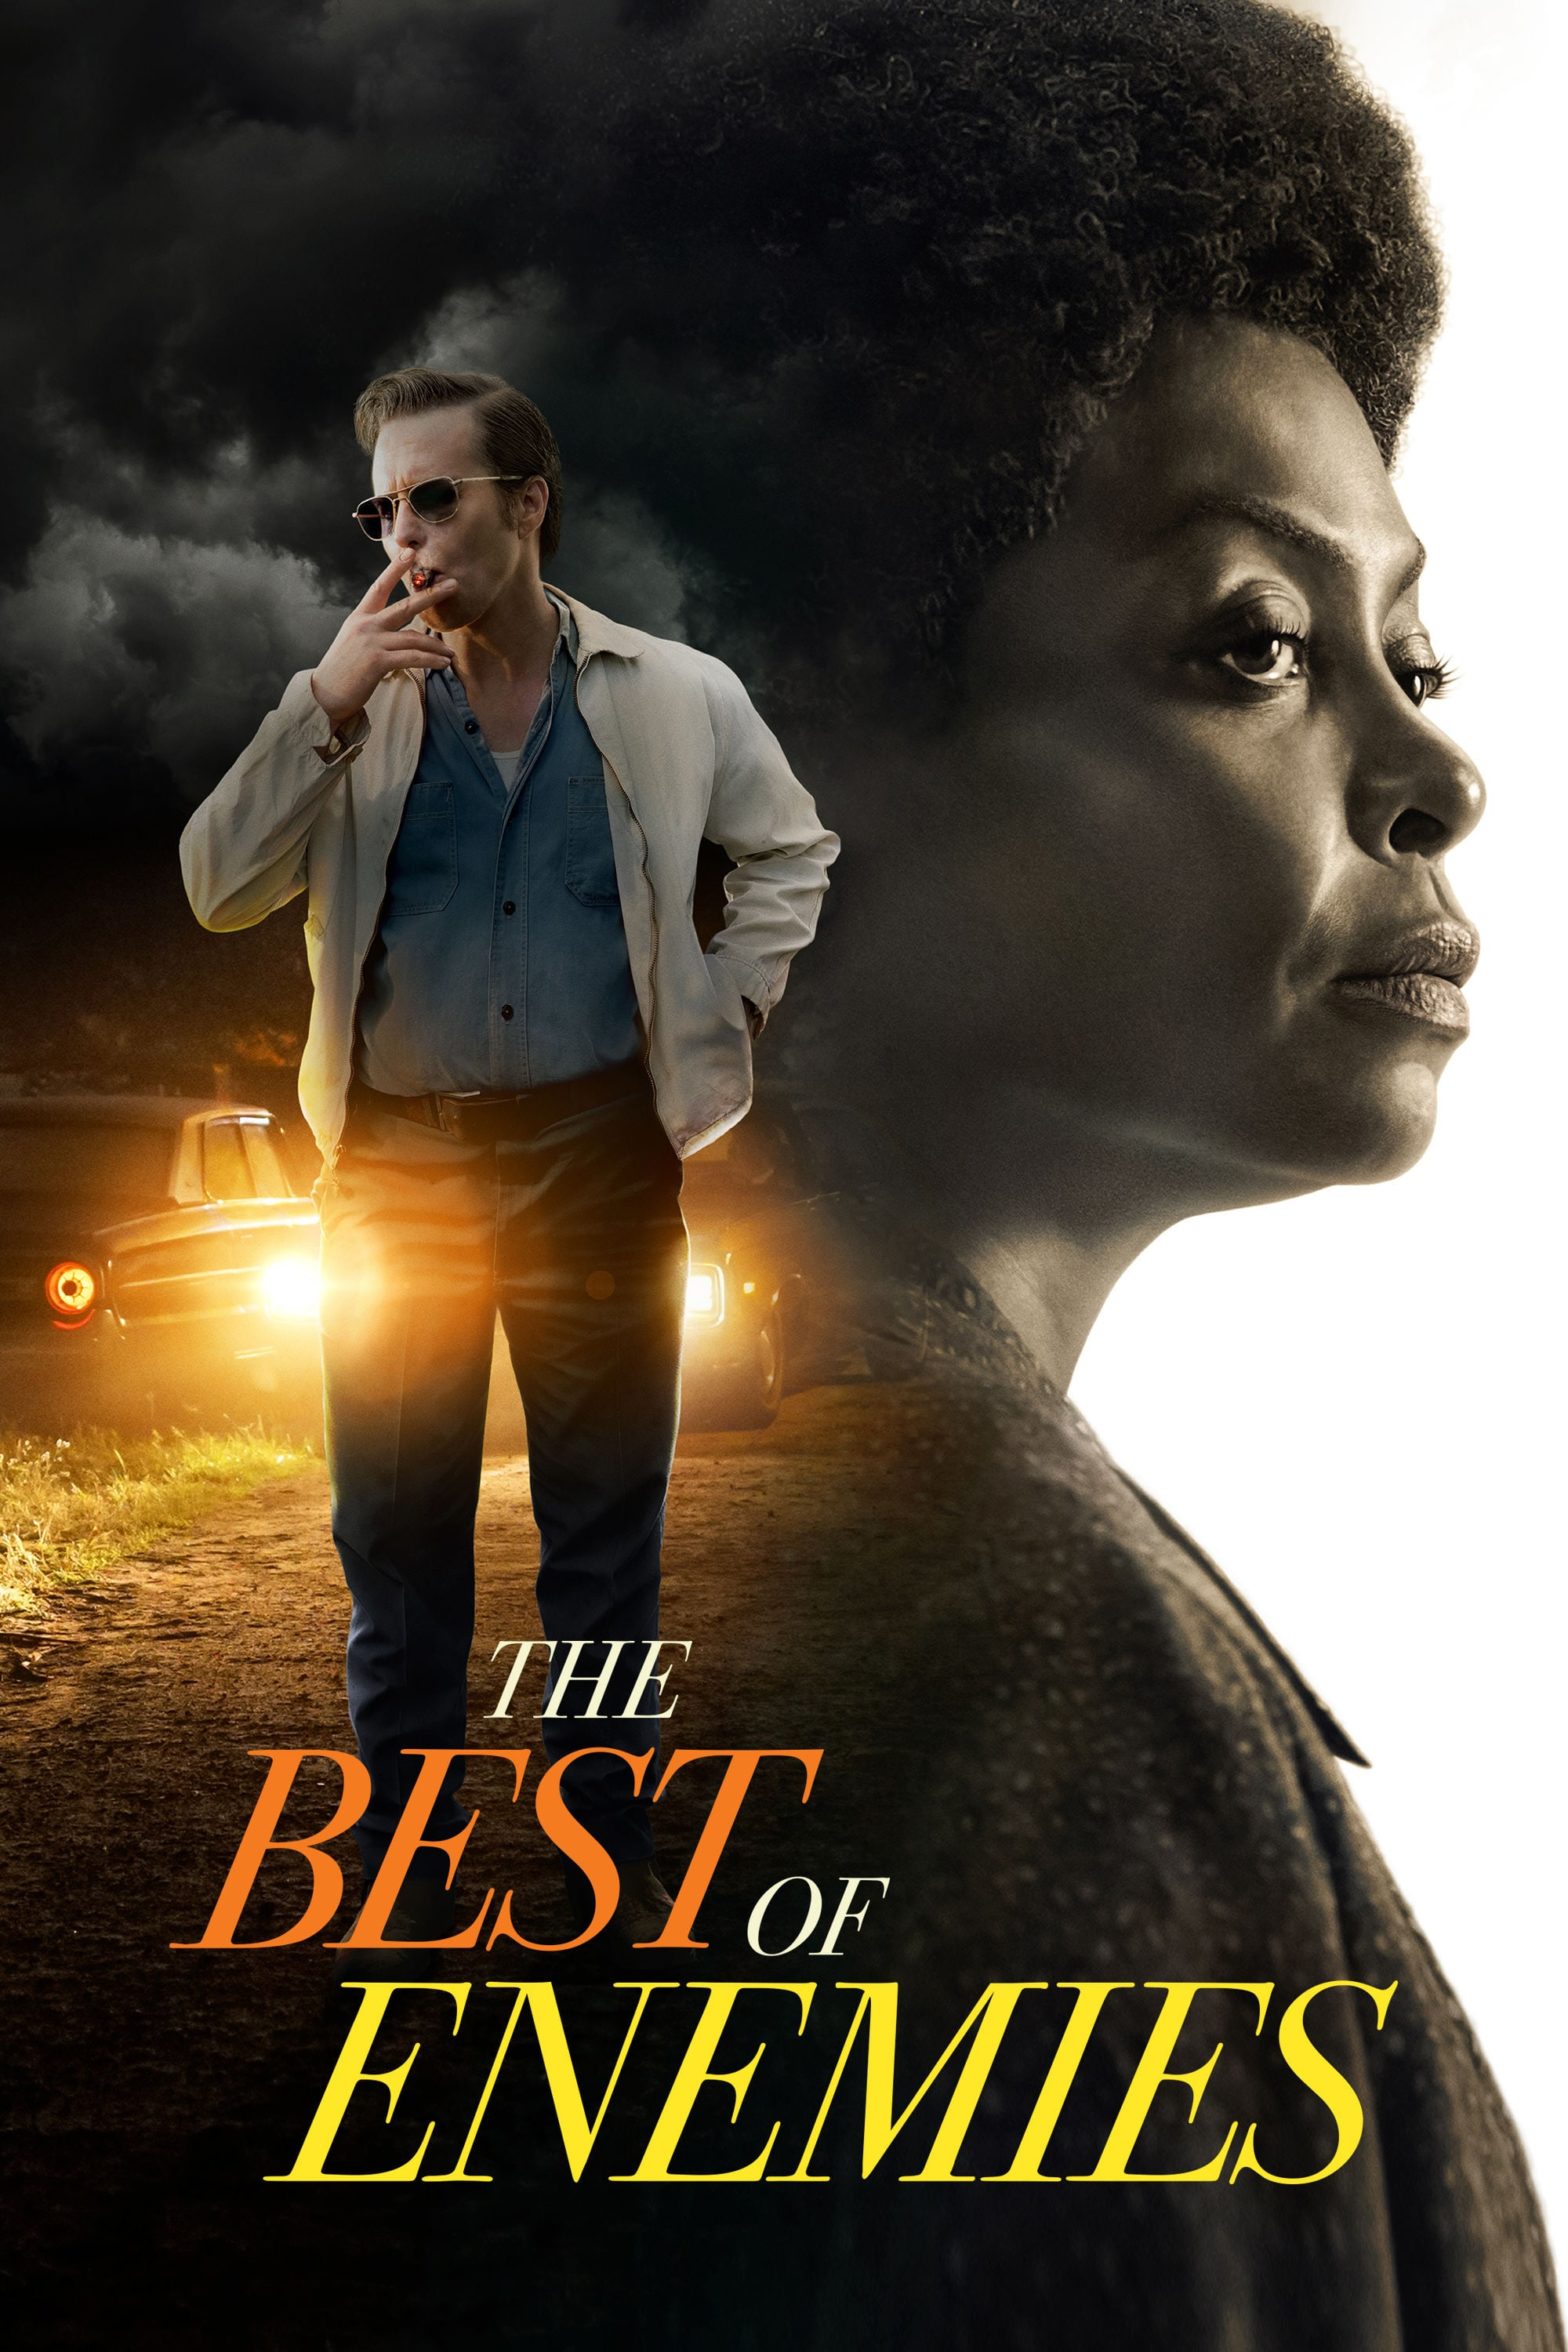 Poster for the movie "The Best of Enemies"